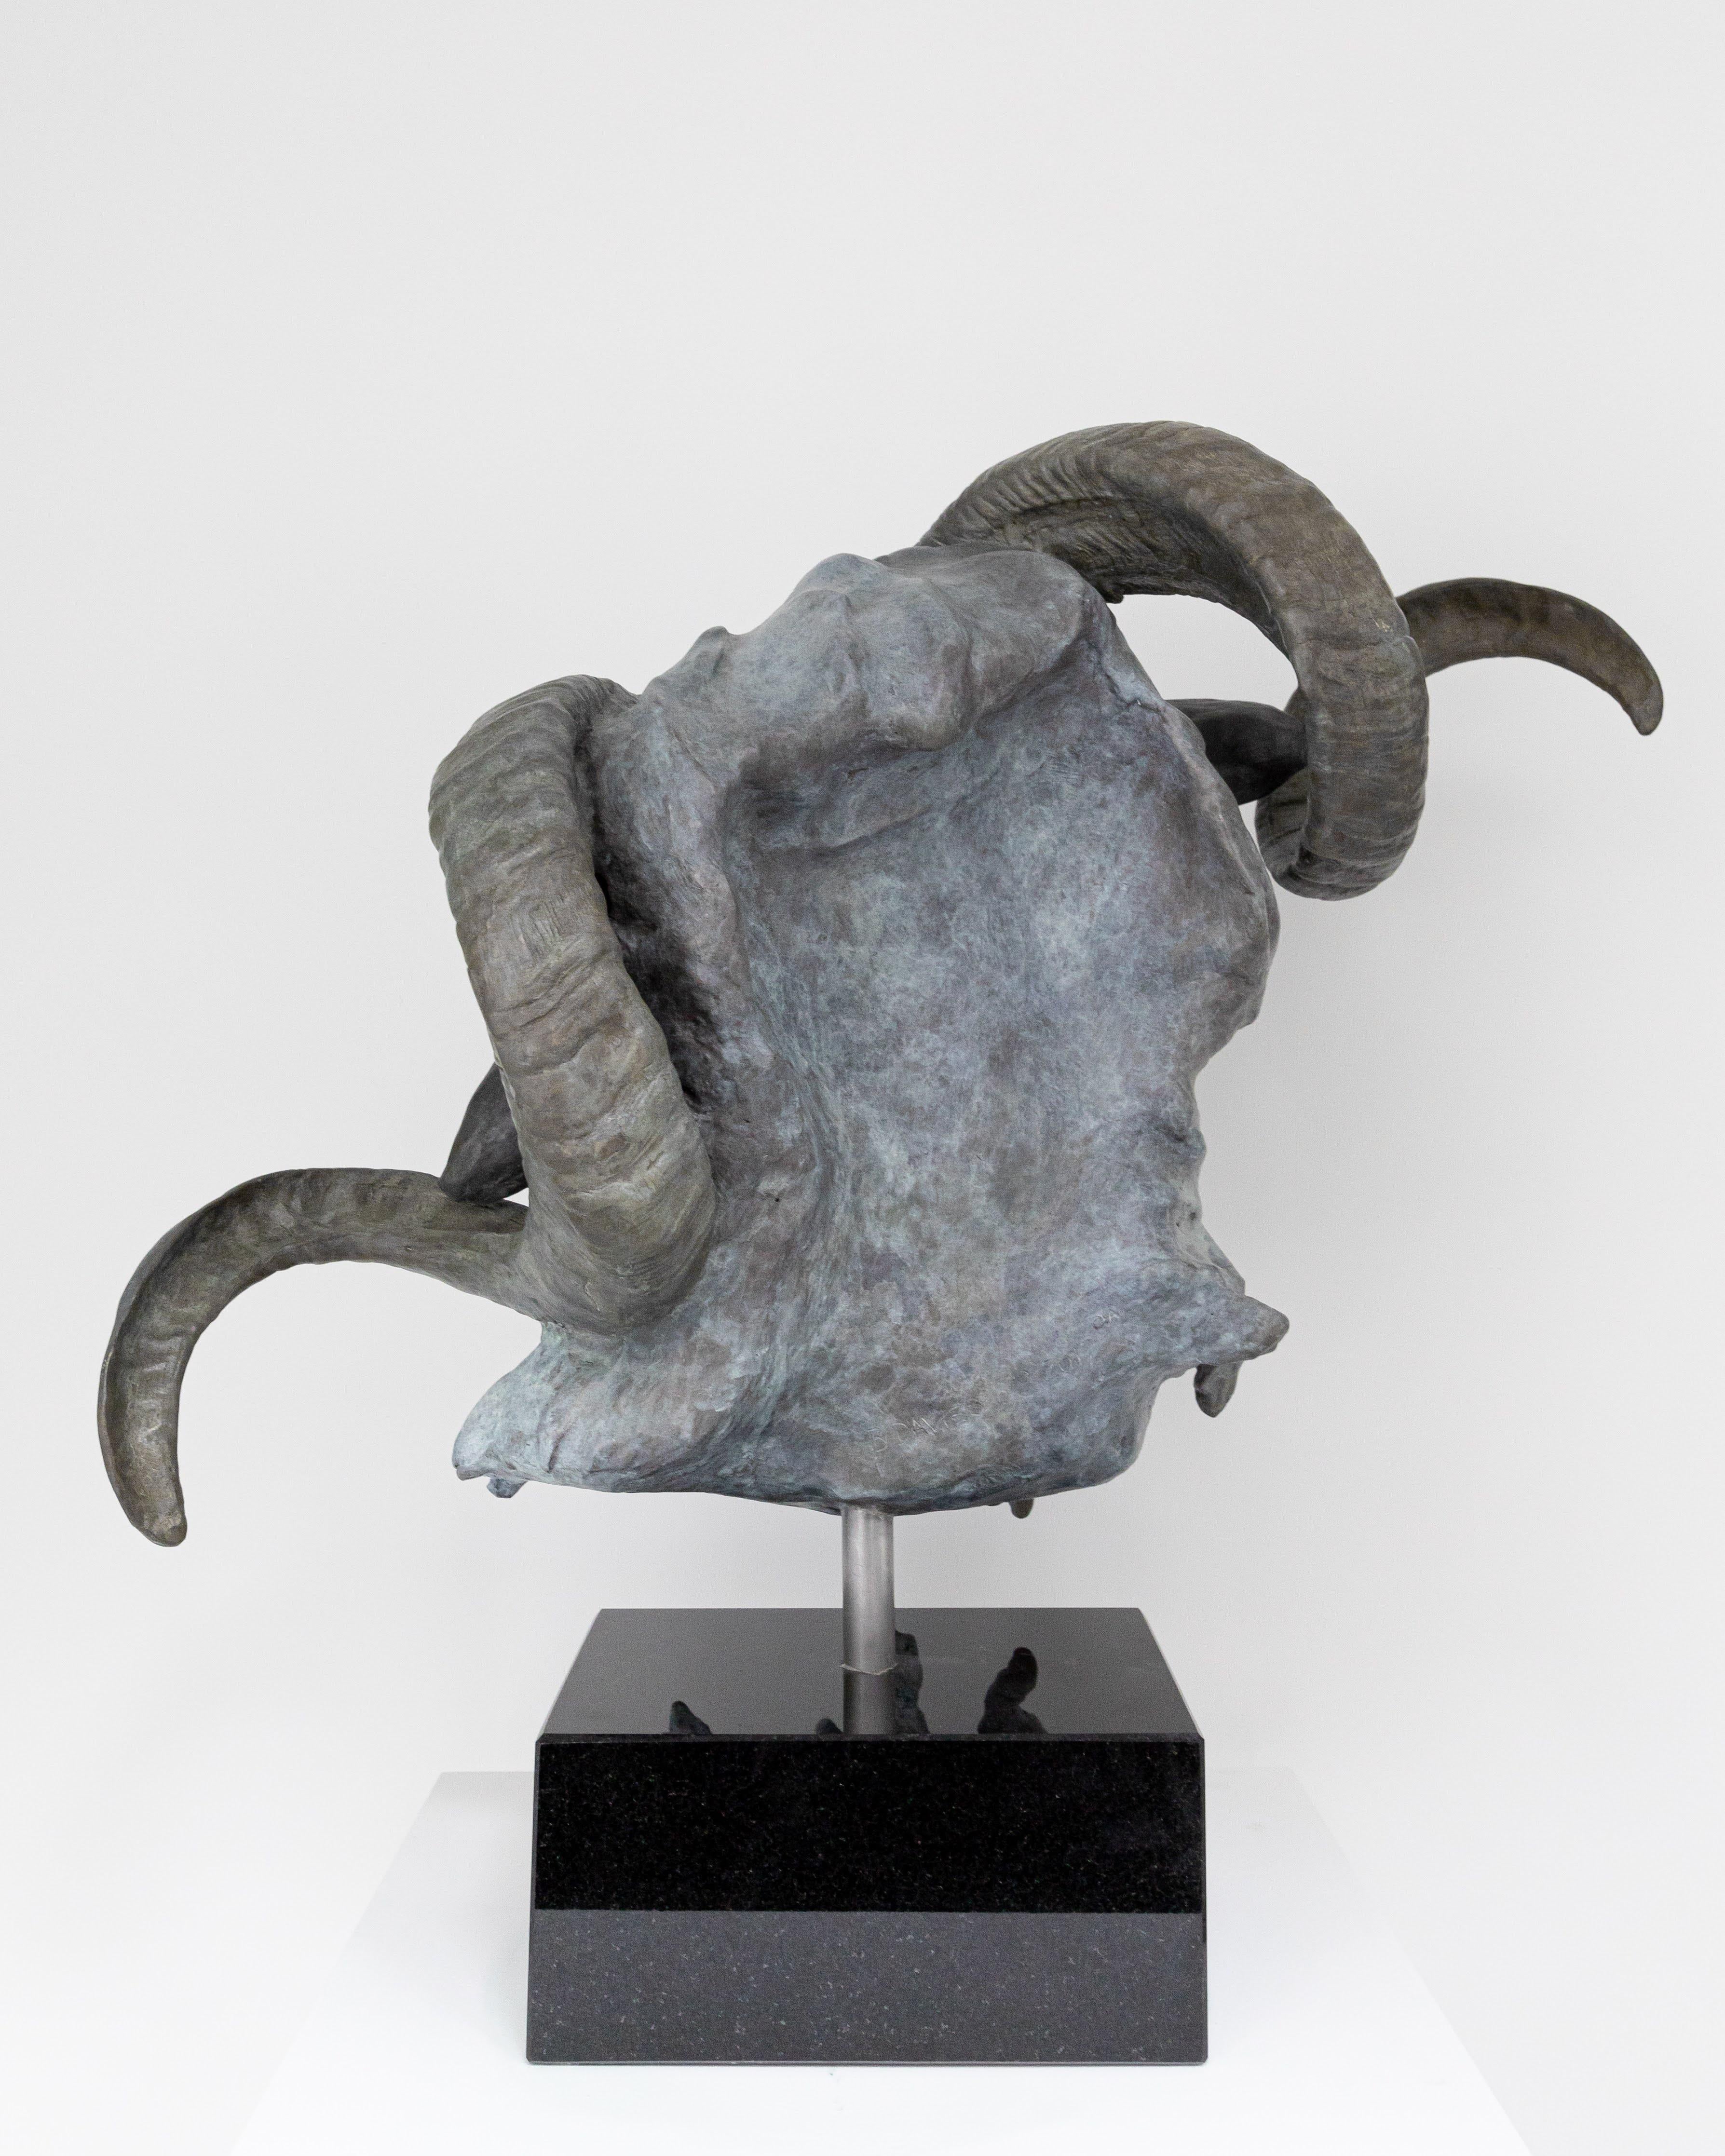 This portrait bust of a Scottish blackface ram that occupies an active use of space, is the ideal subject matter for a dynamic, bold yet serene bronze sculpture. The ram's magnificent horns wildly spiralling out from this sculpture command attention